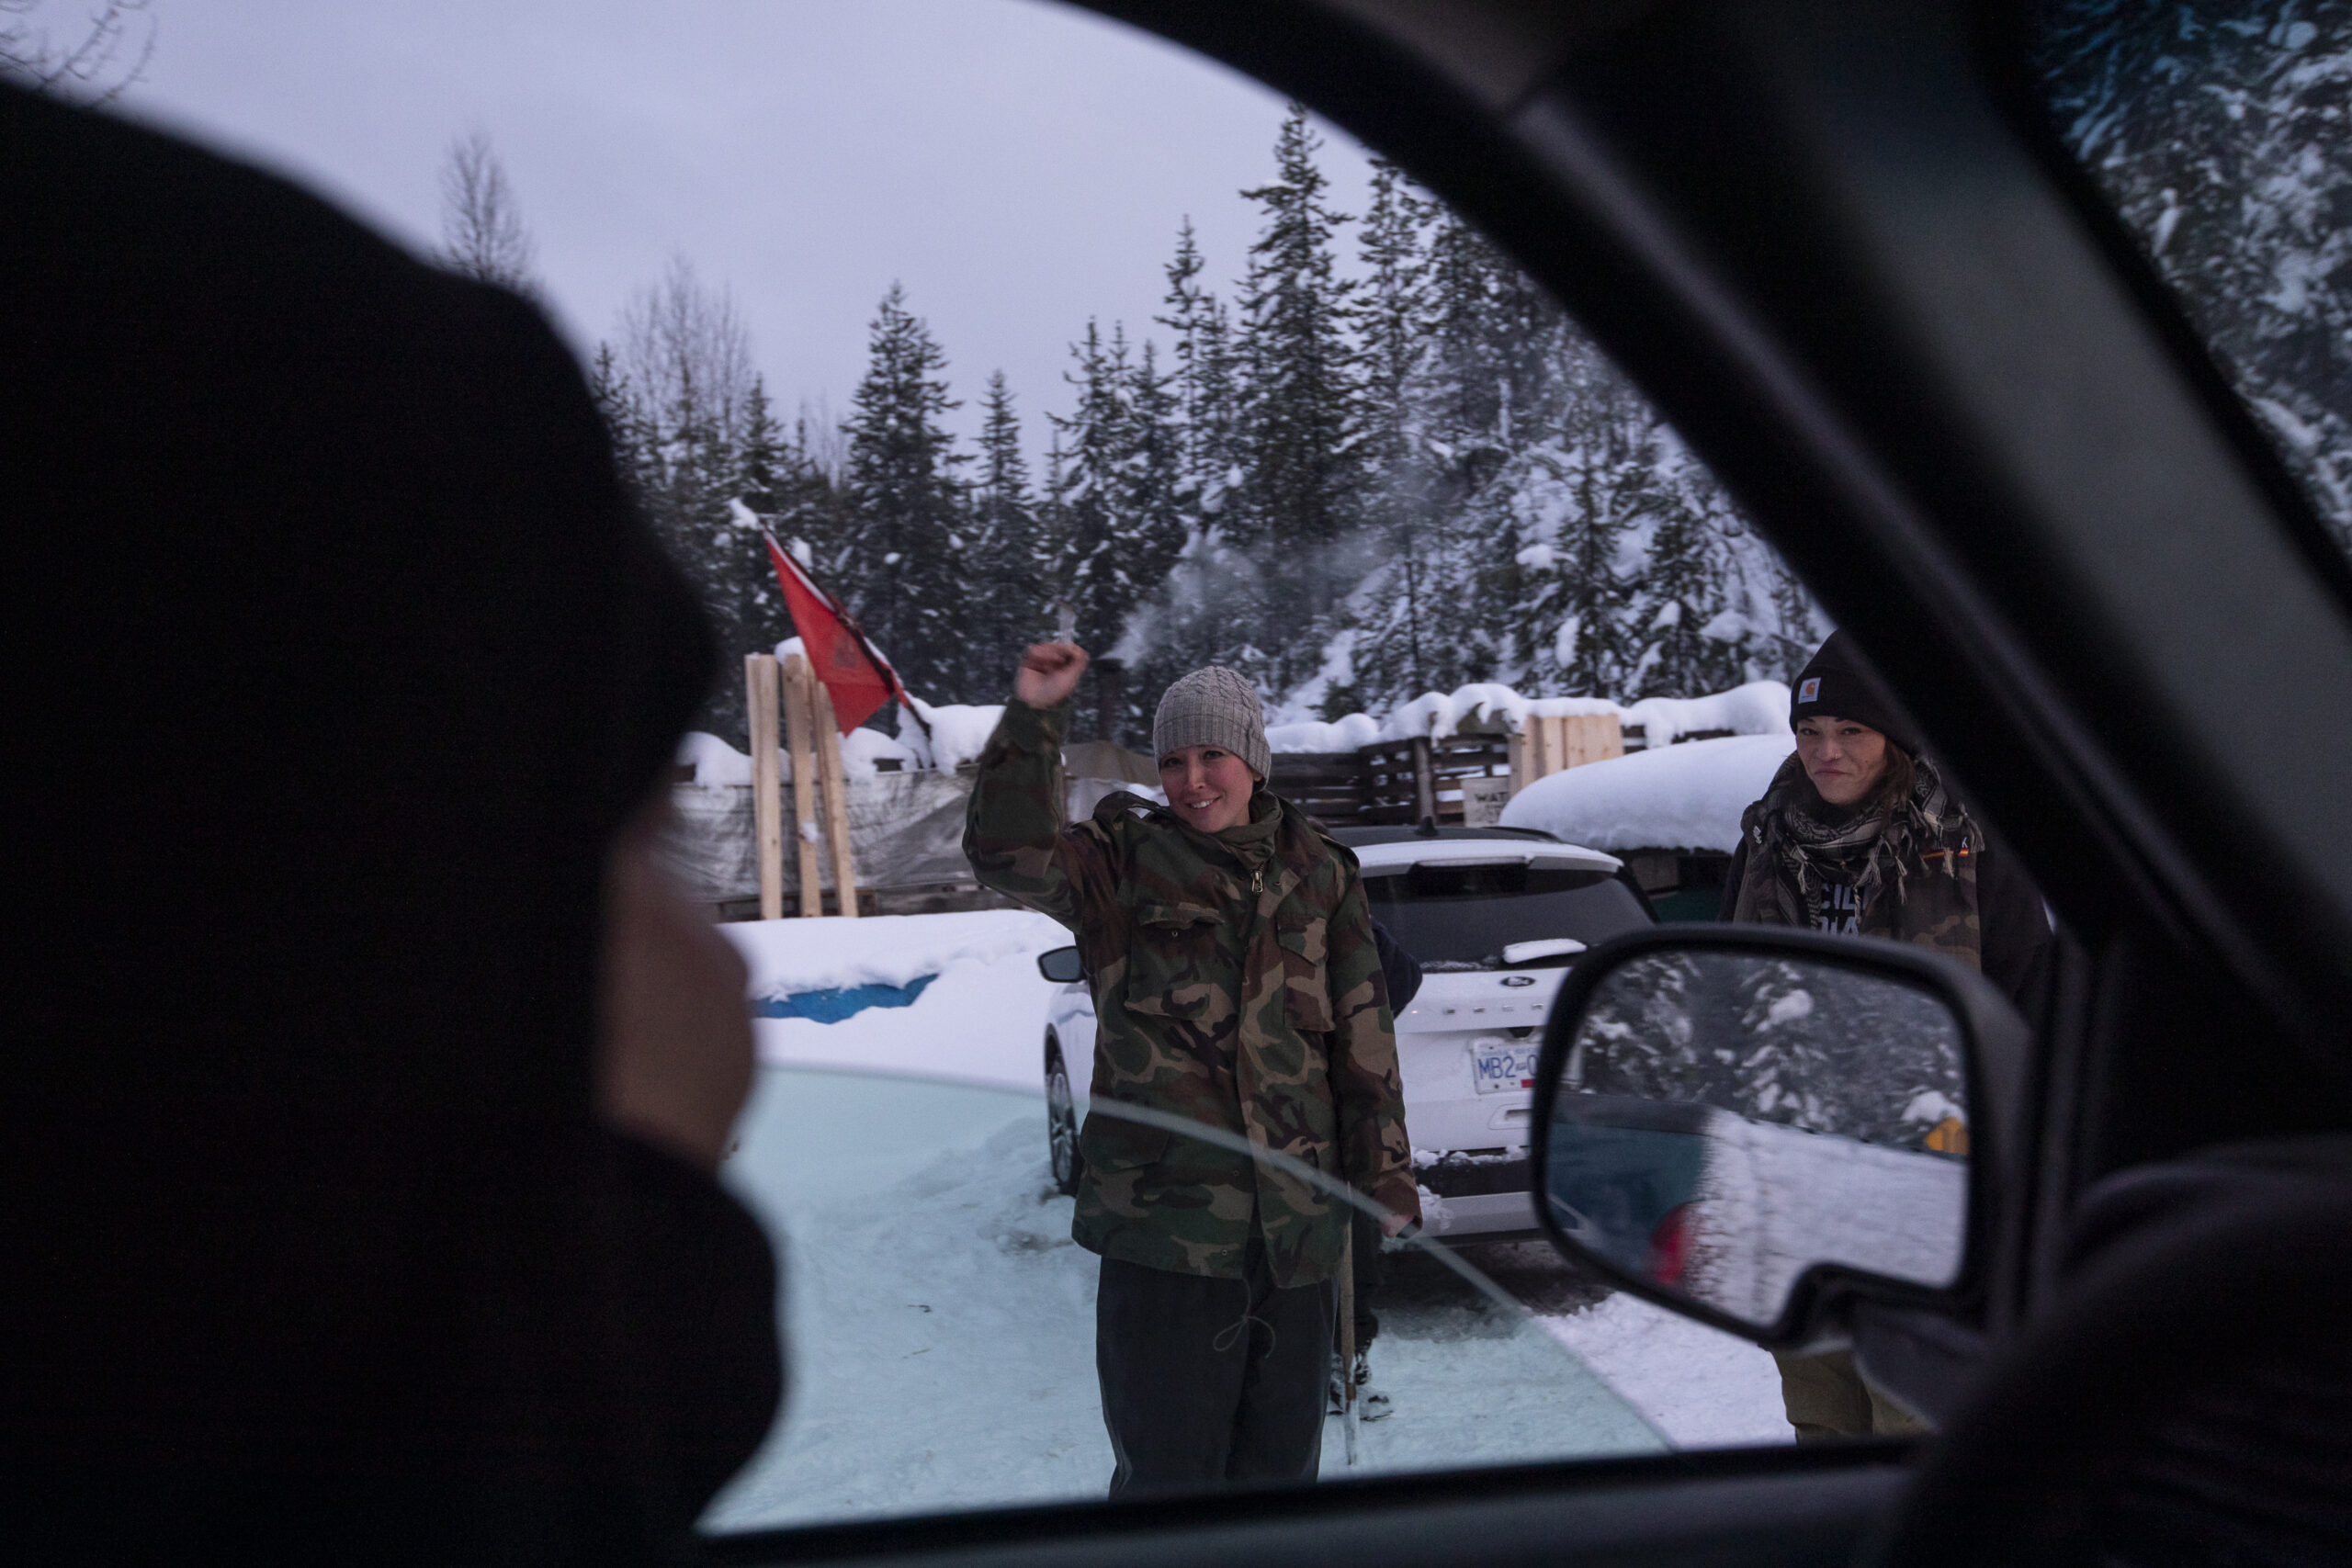 Molly Wickham stands at a blockade in the snow